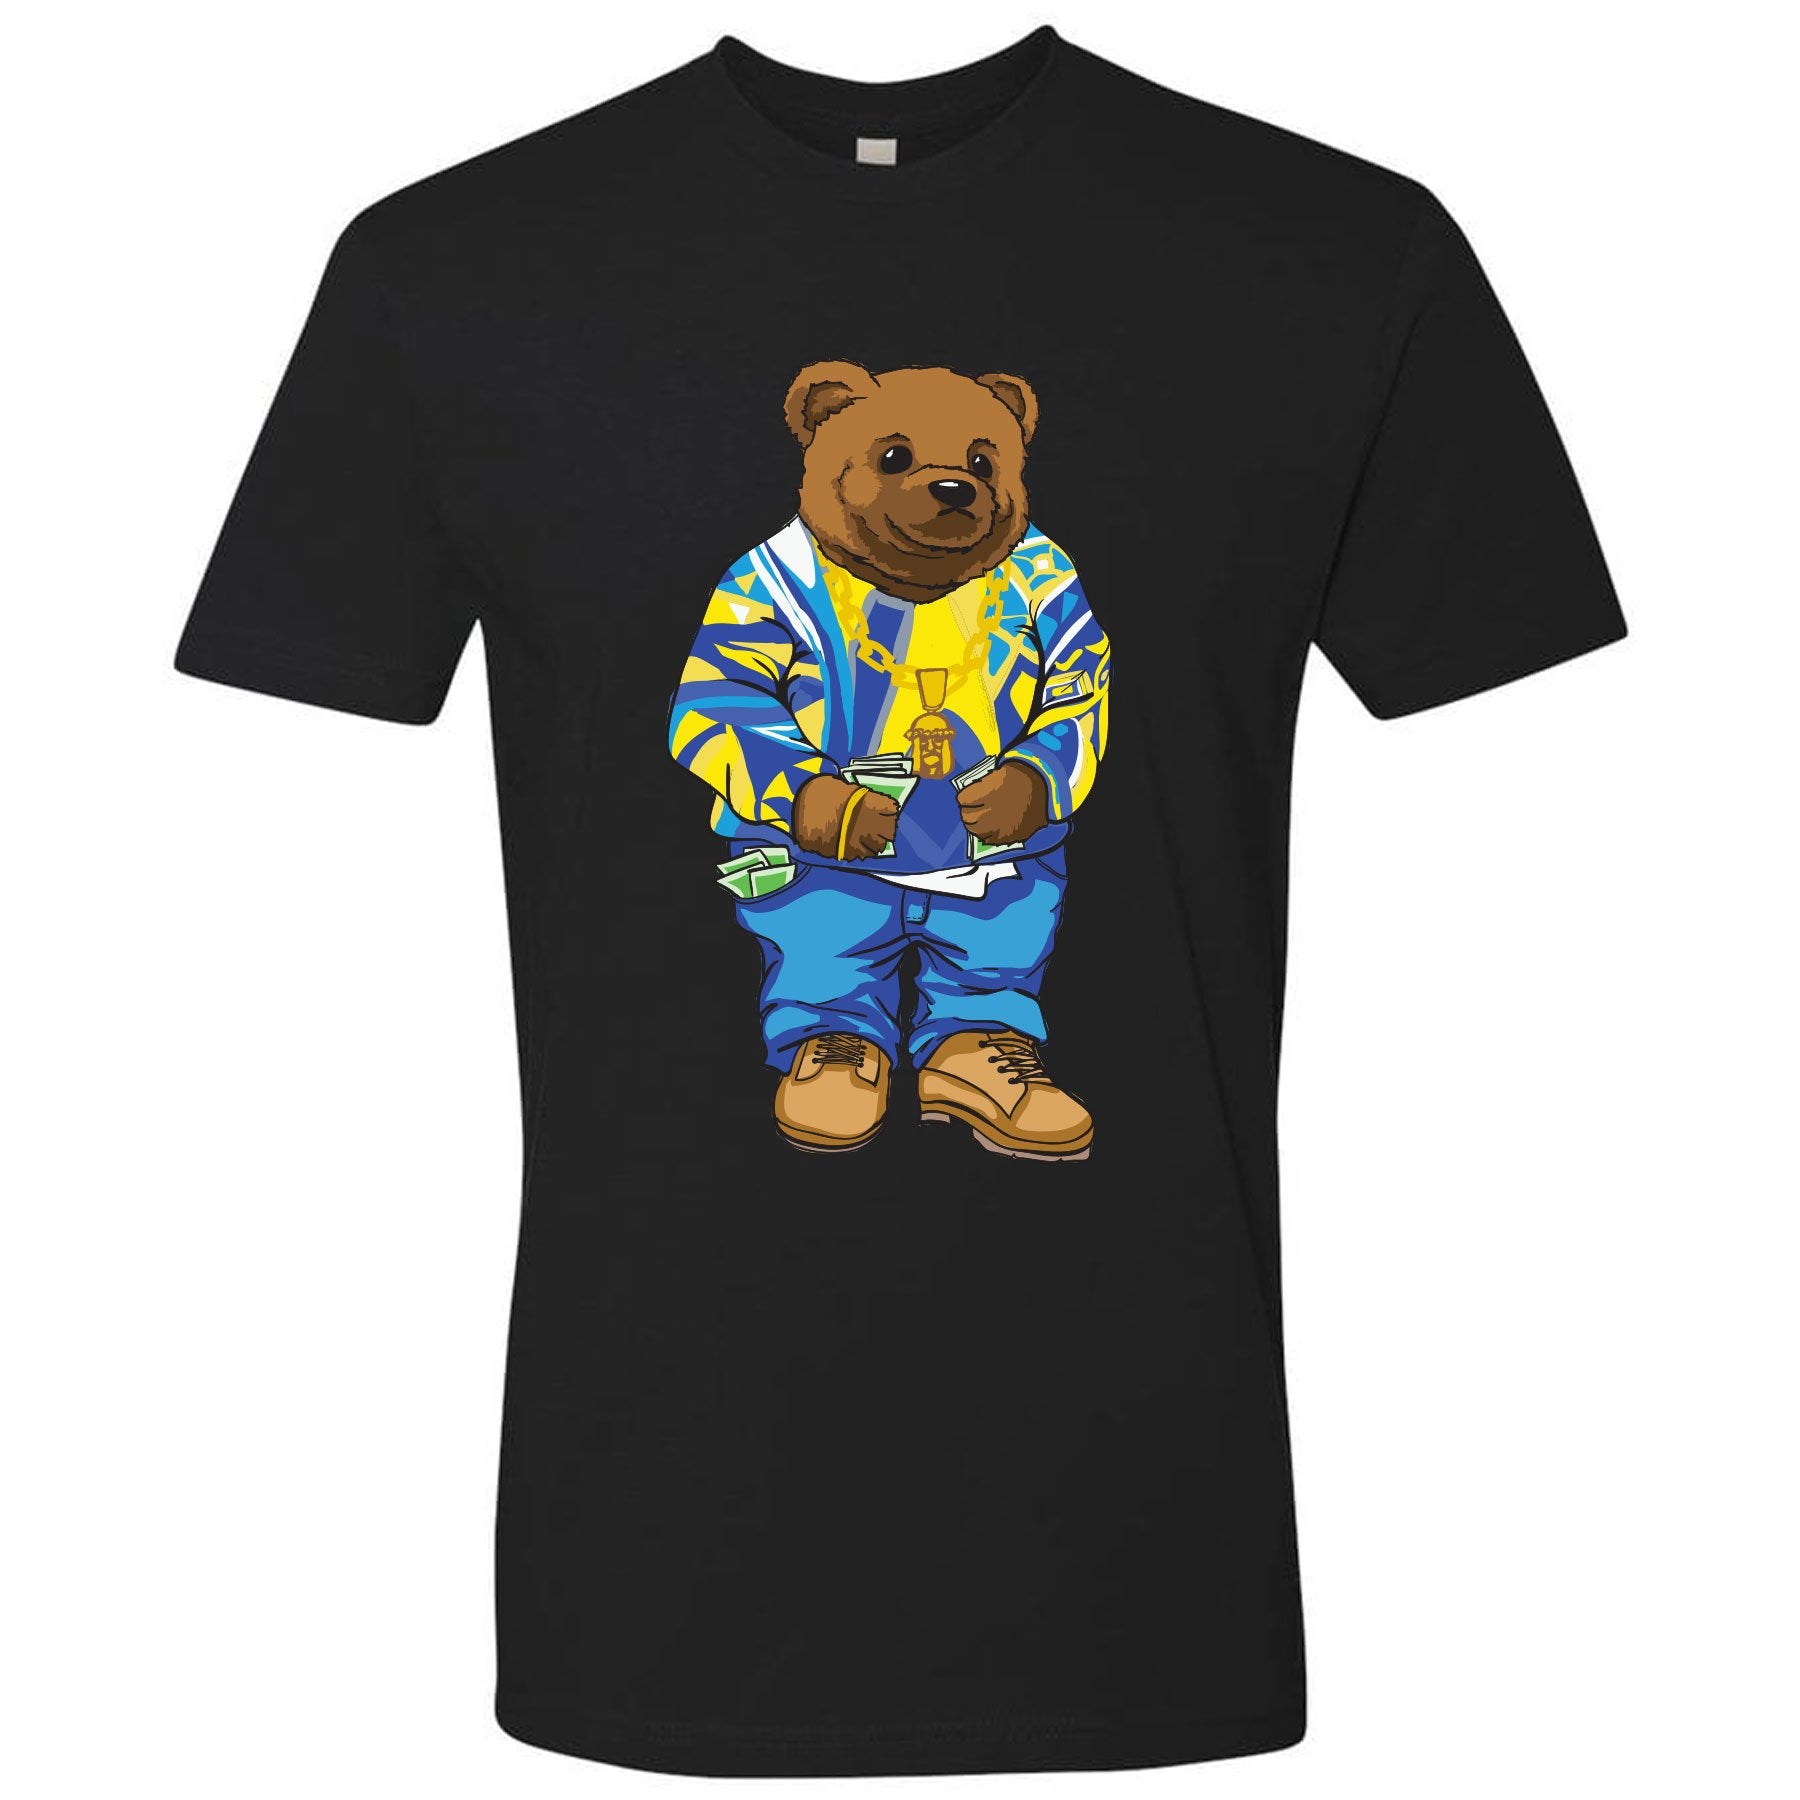 Printed on the front of the Air Jordan 5 Laney Alternate JSP sneaker matching t-shirt is the Sweater Bear wearing a Coogi sweater that matches the colorway of the Jordan 5 Laneys